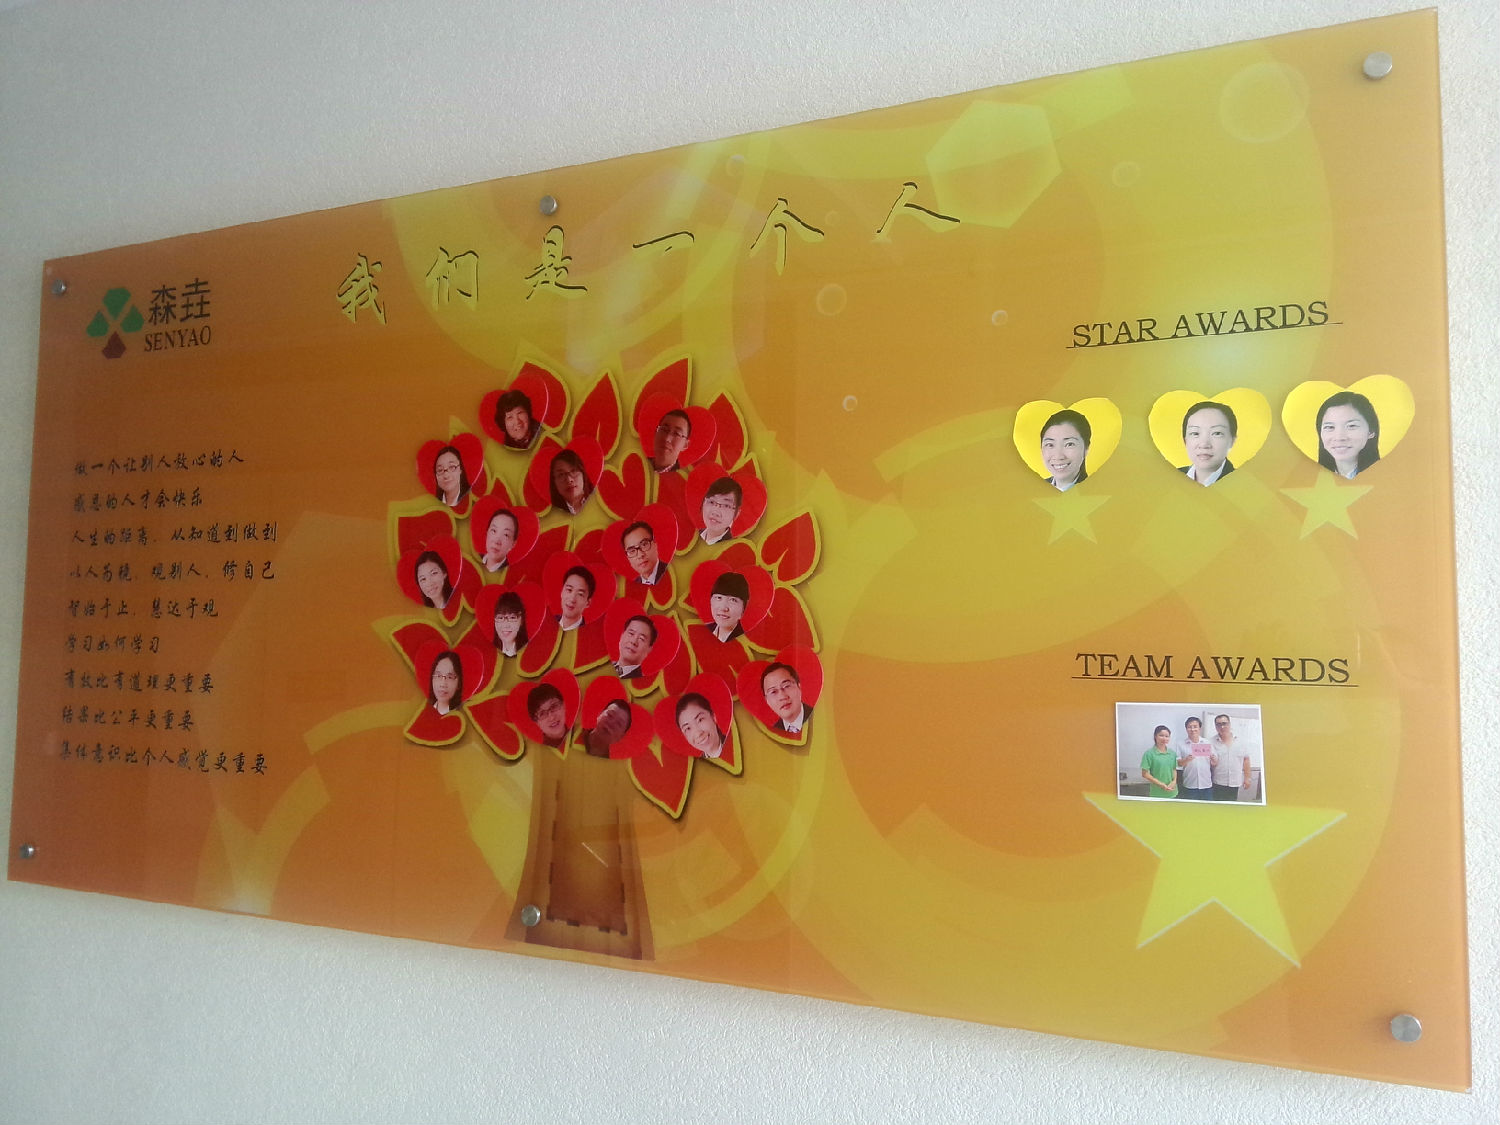 Shanghai Qualitywell is a company with 16 employee who come from the different provinces.